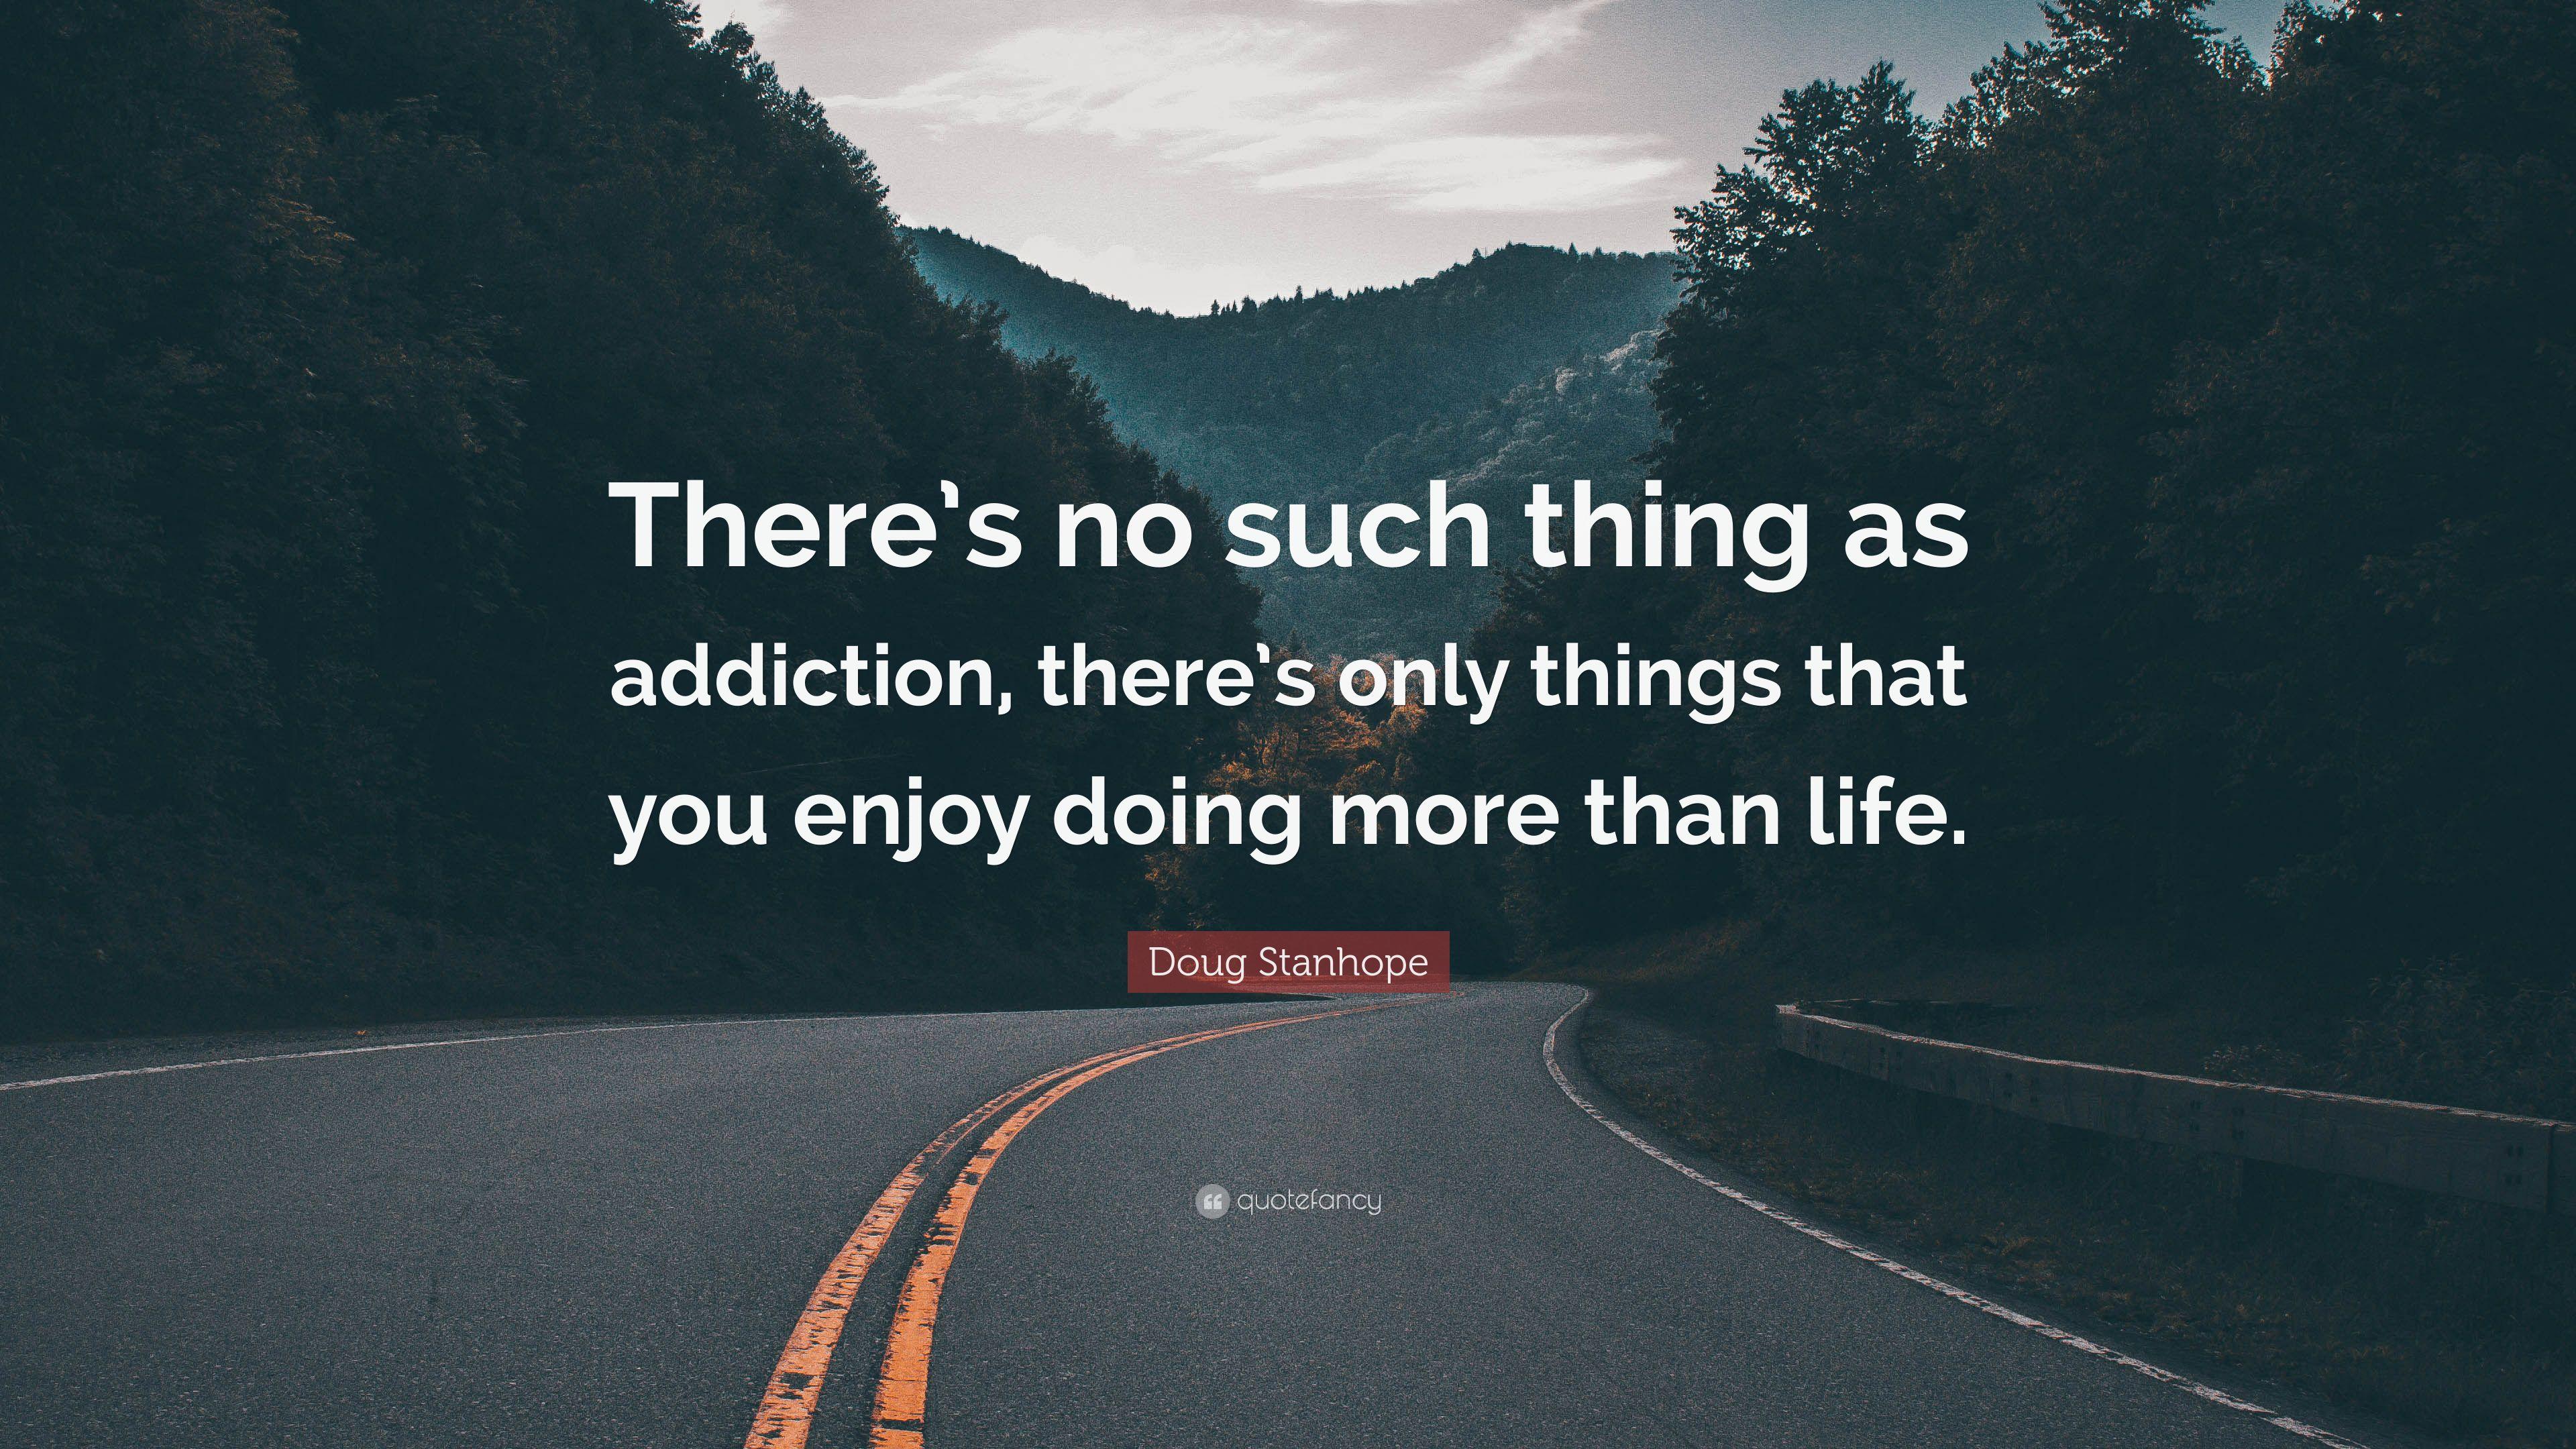 Doug Stanhope Quote: “There's no such thing as addiction, there's